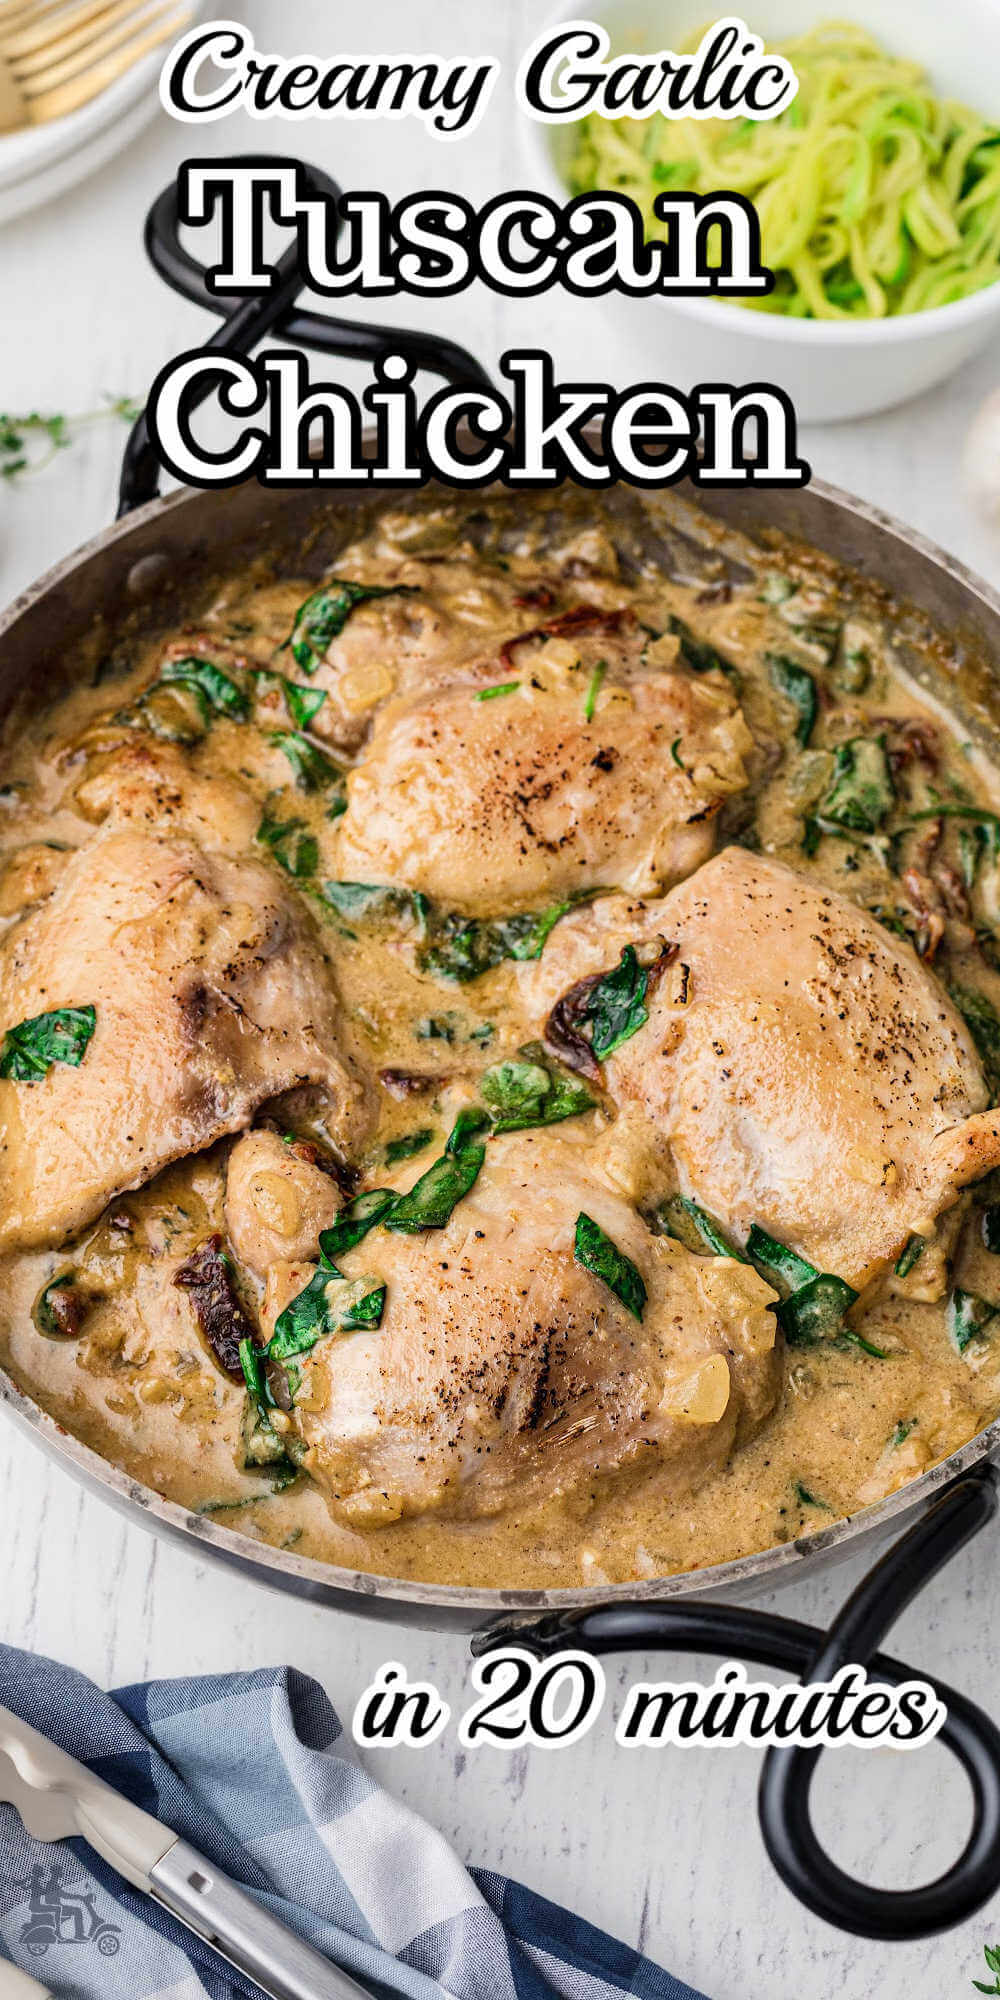 This creamy Tuscan chicken is one of my favorite one-pan recipes. It bursts with flavor and looks so pretty with the baby spinach and sweet sun dried tomatoes mixed throughout the creamy garlic sauce. Make this Tuscan chicken for the family in just 30 minutes, served over your favorite pasta or zucchini noodles for a low-carb option.